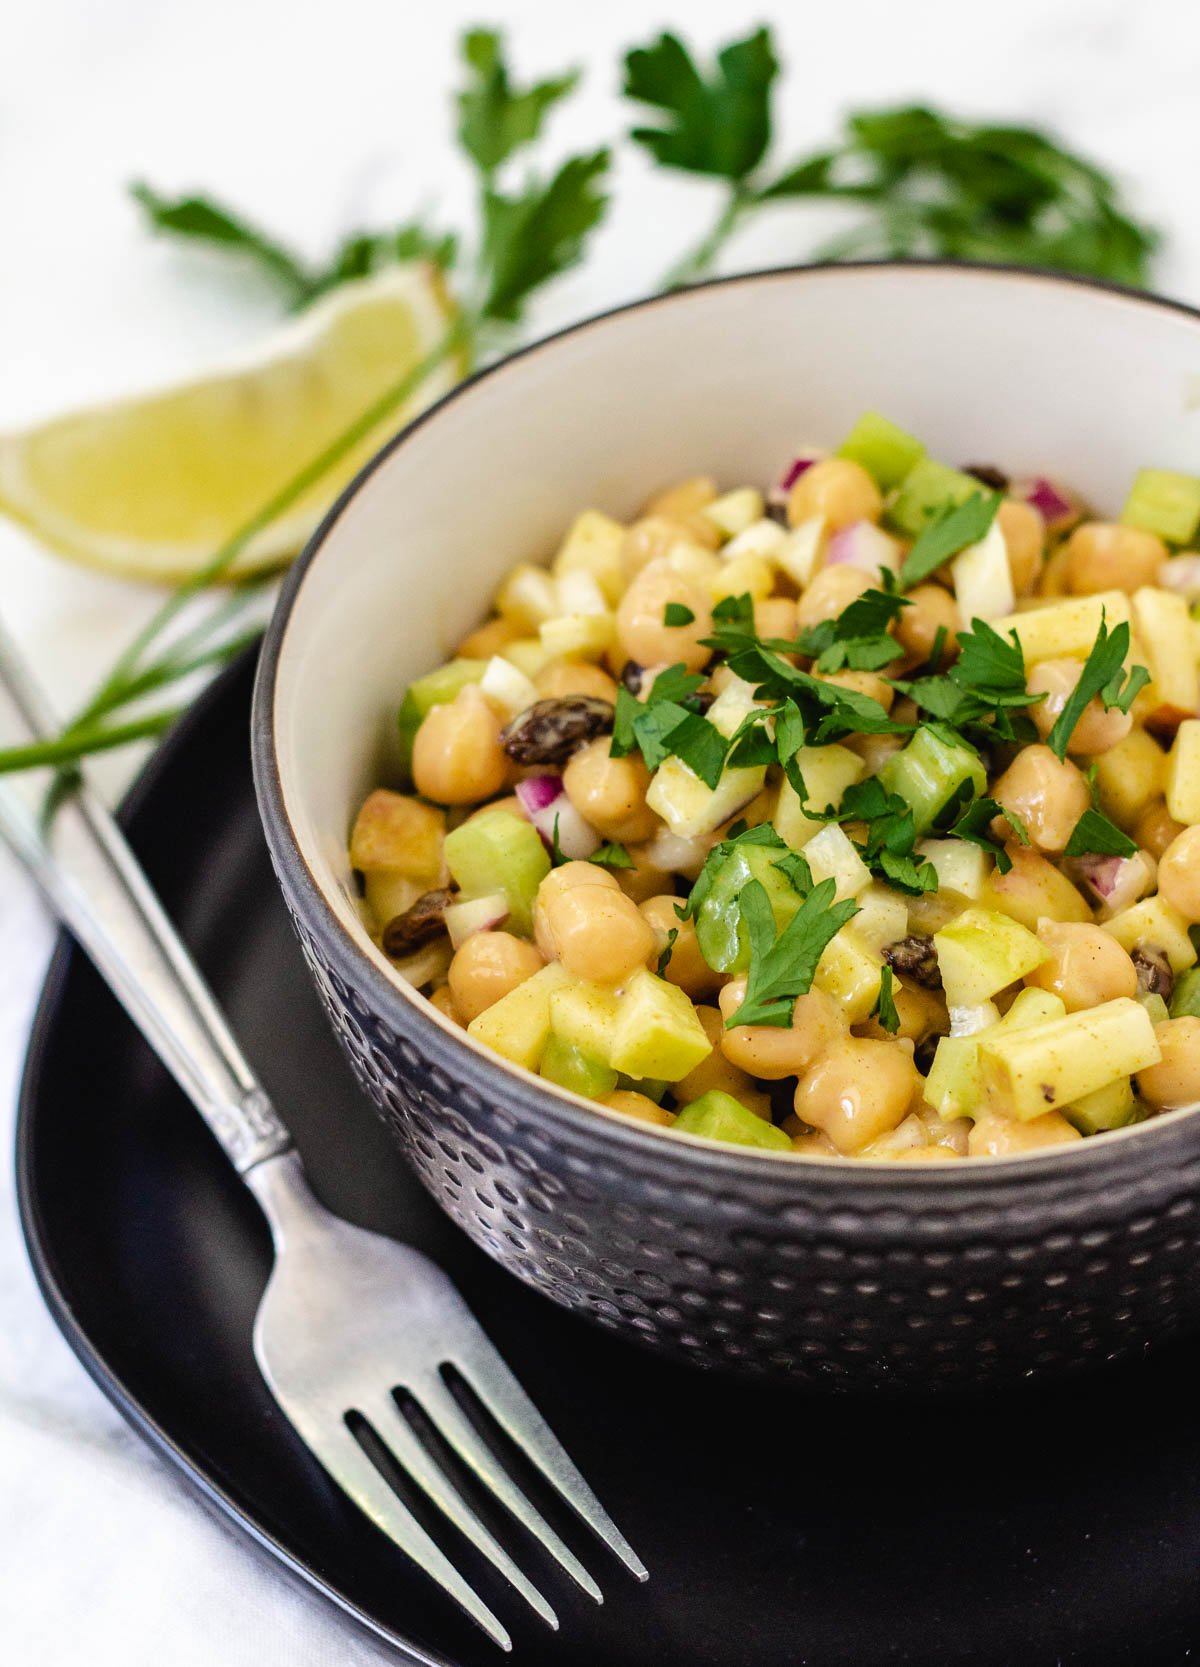 Chickpea curry salad in a bowl on top of a black plate topped with parsley with fork on the side.